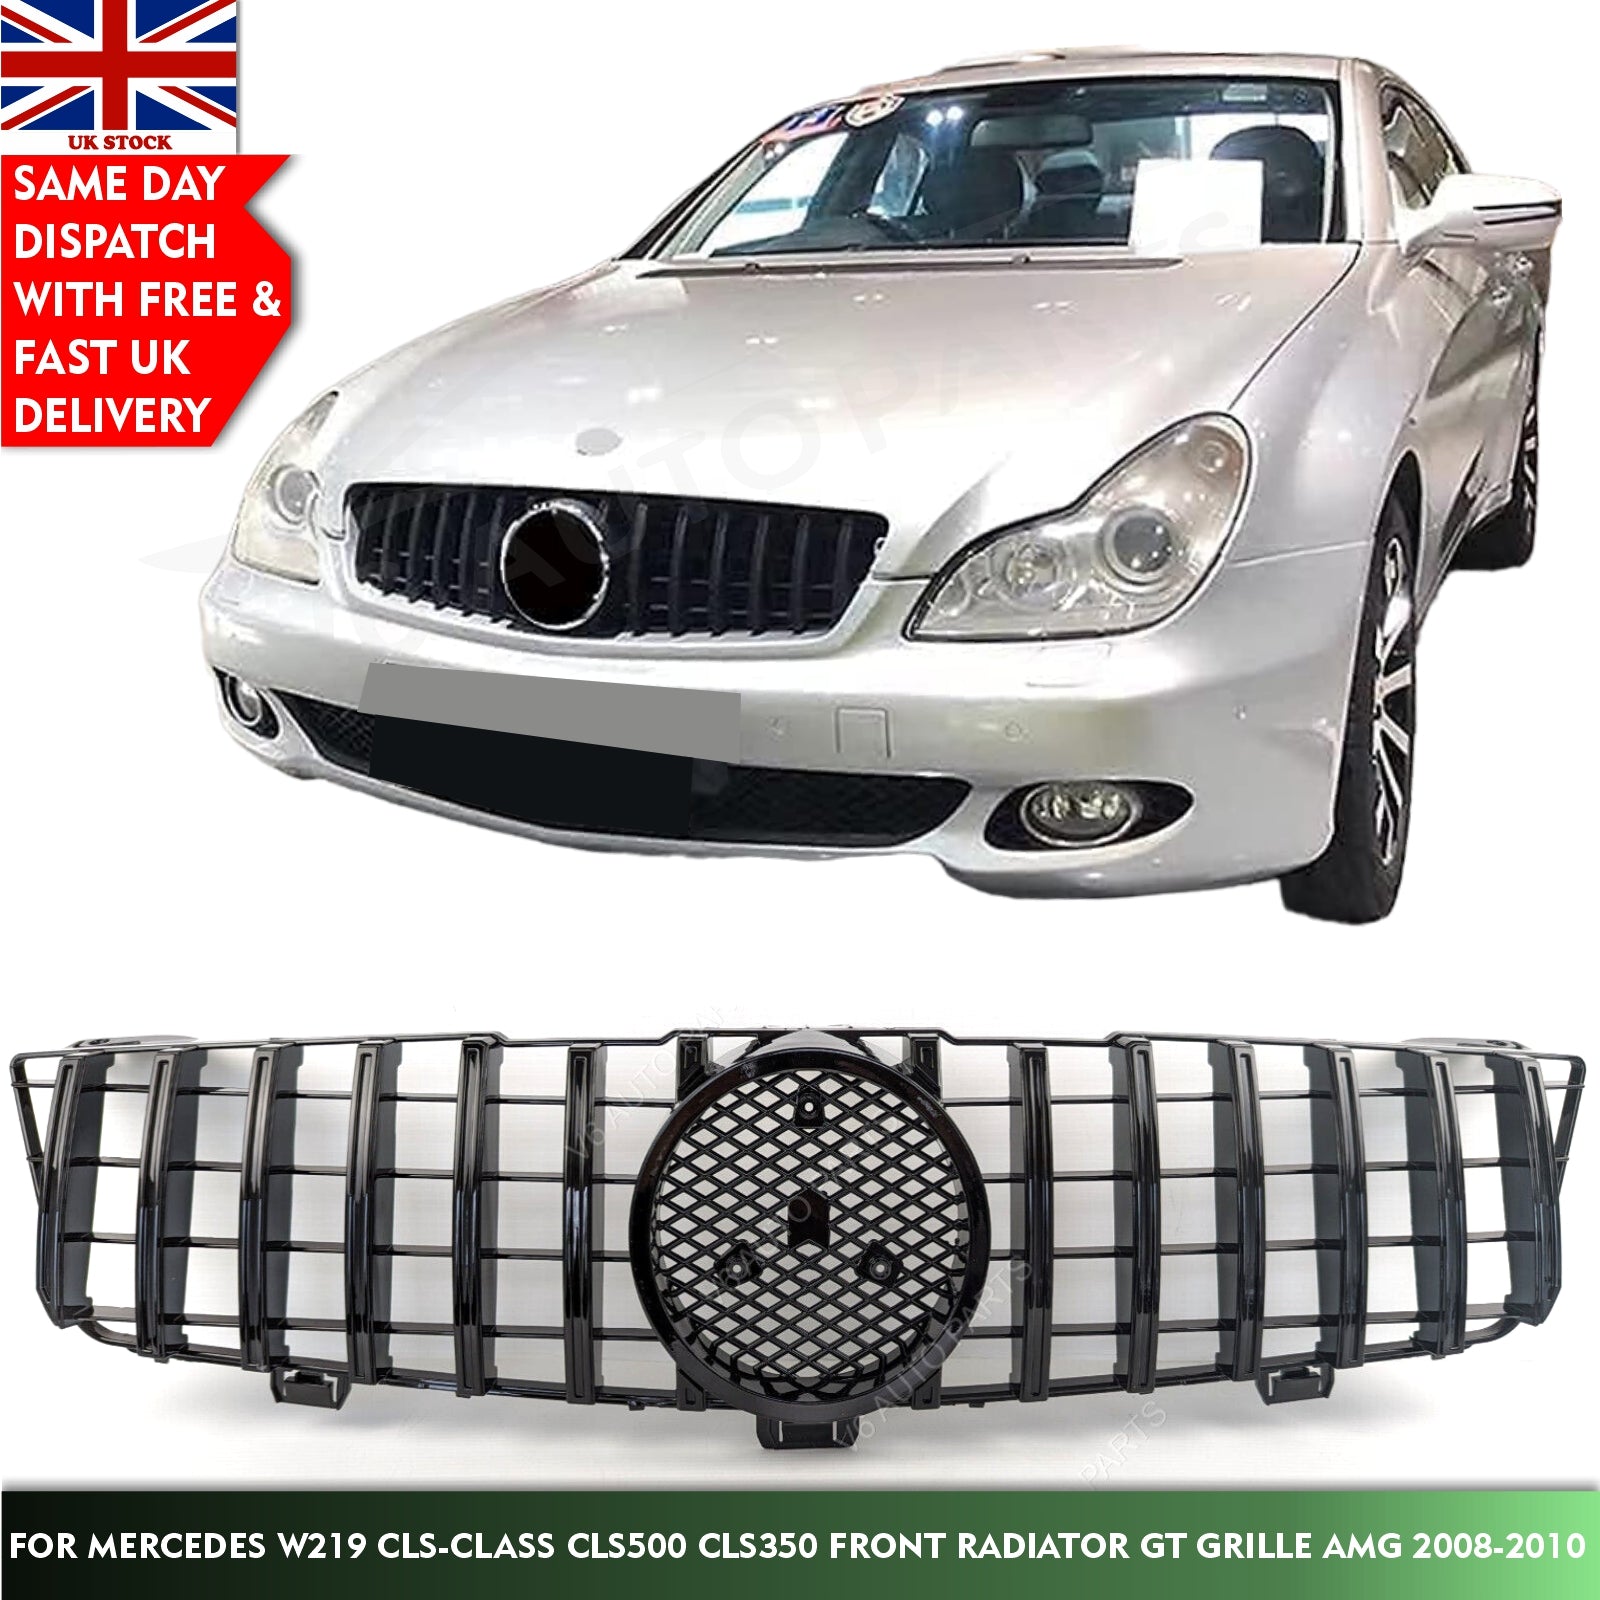 For Mercedes CLS Class C219 CLS500 CLS300 CLS55 AMG Front Bumper Grille 2008-10